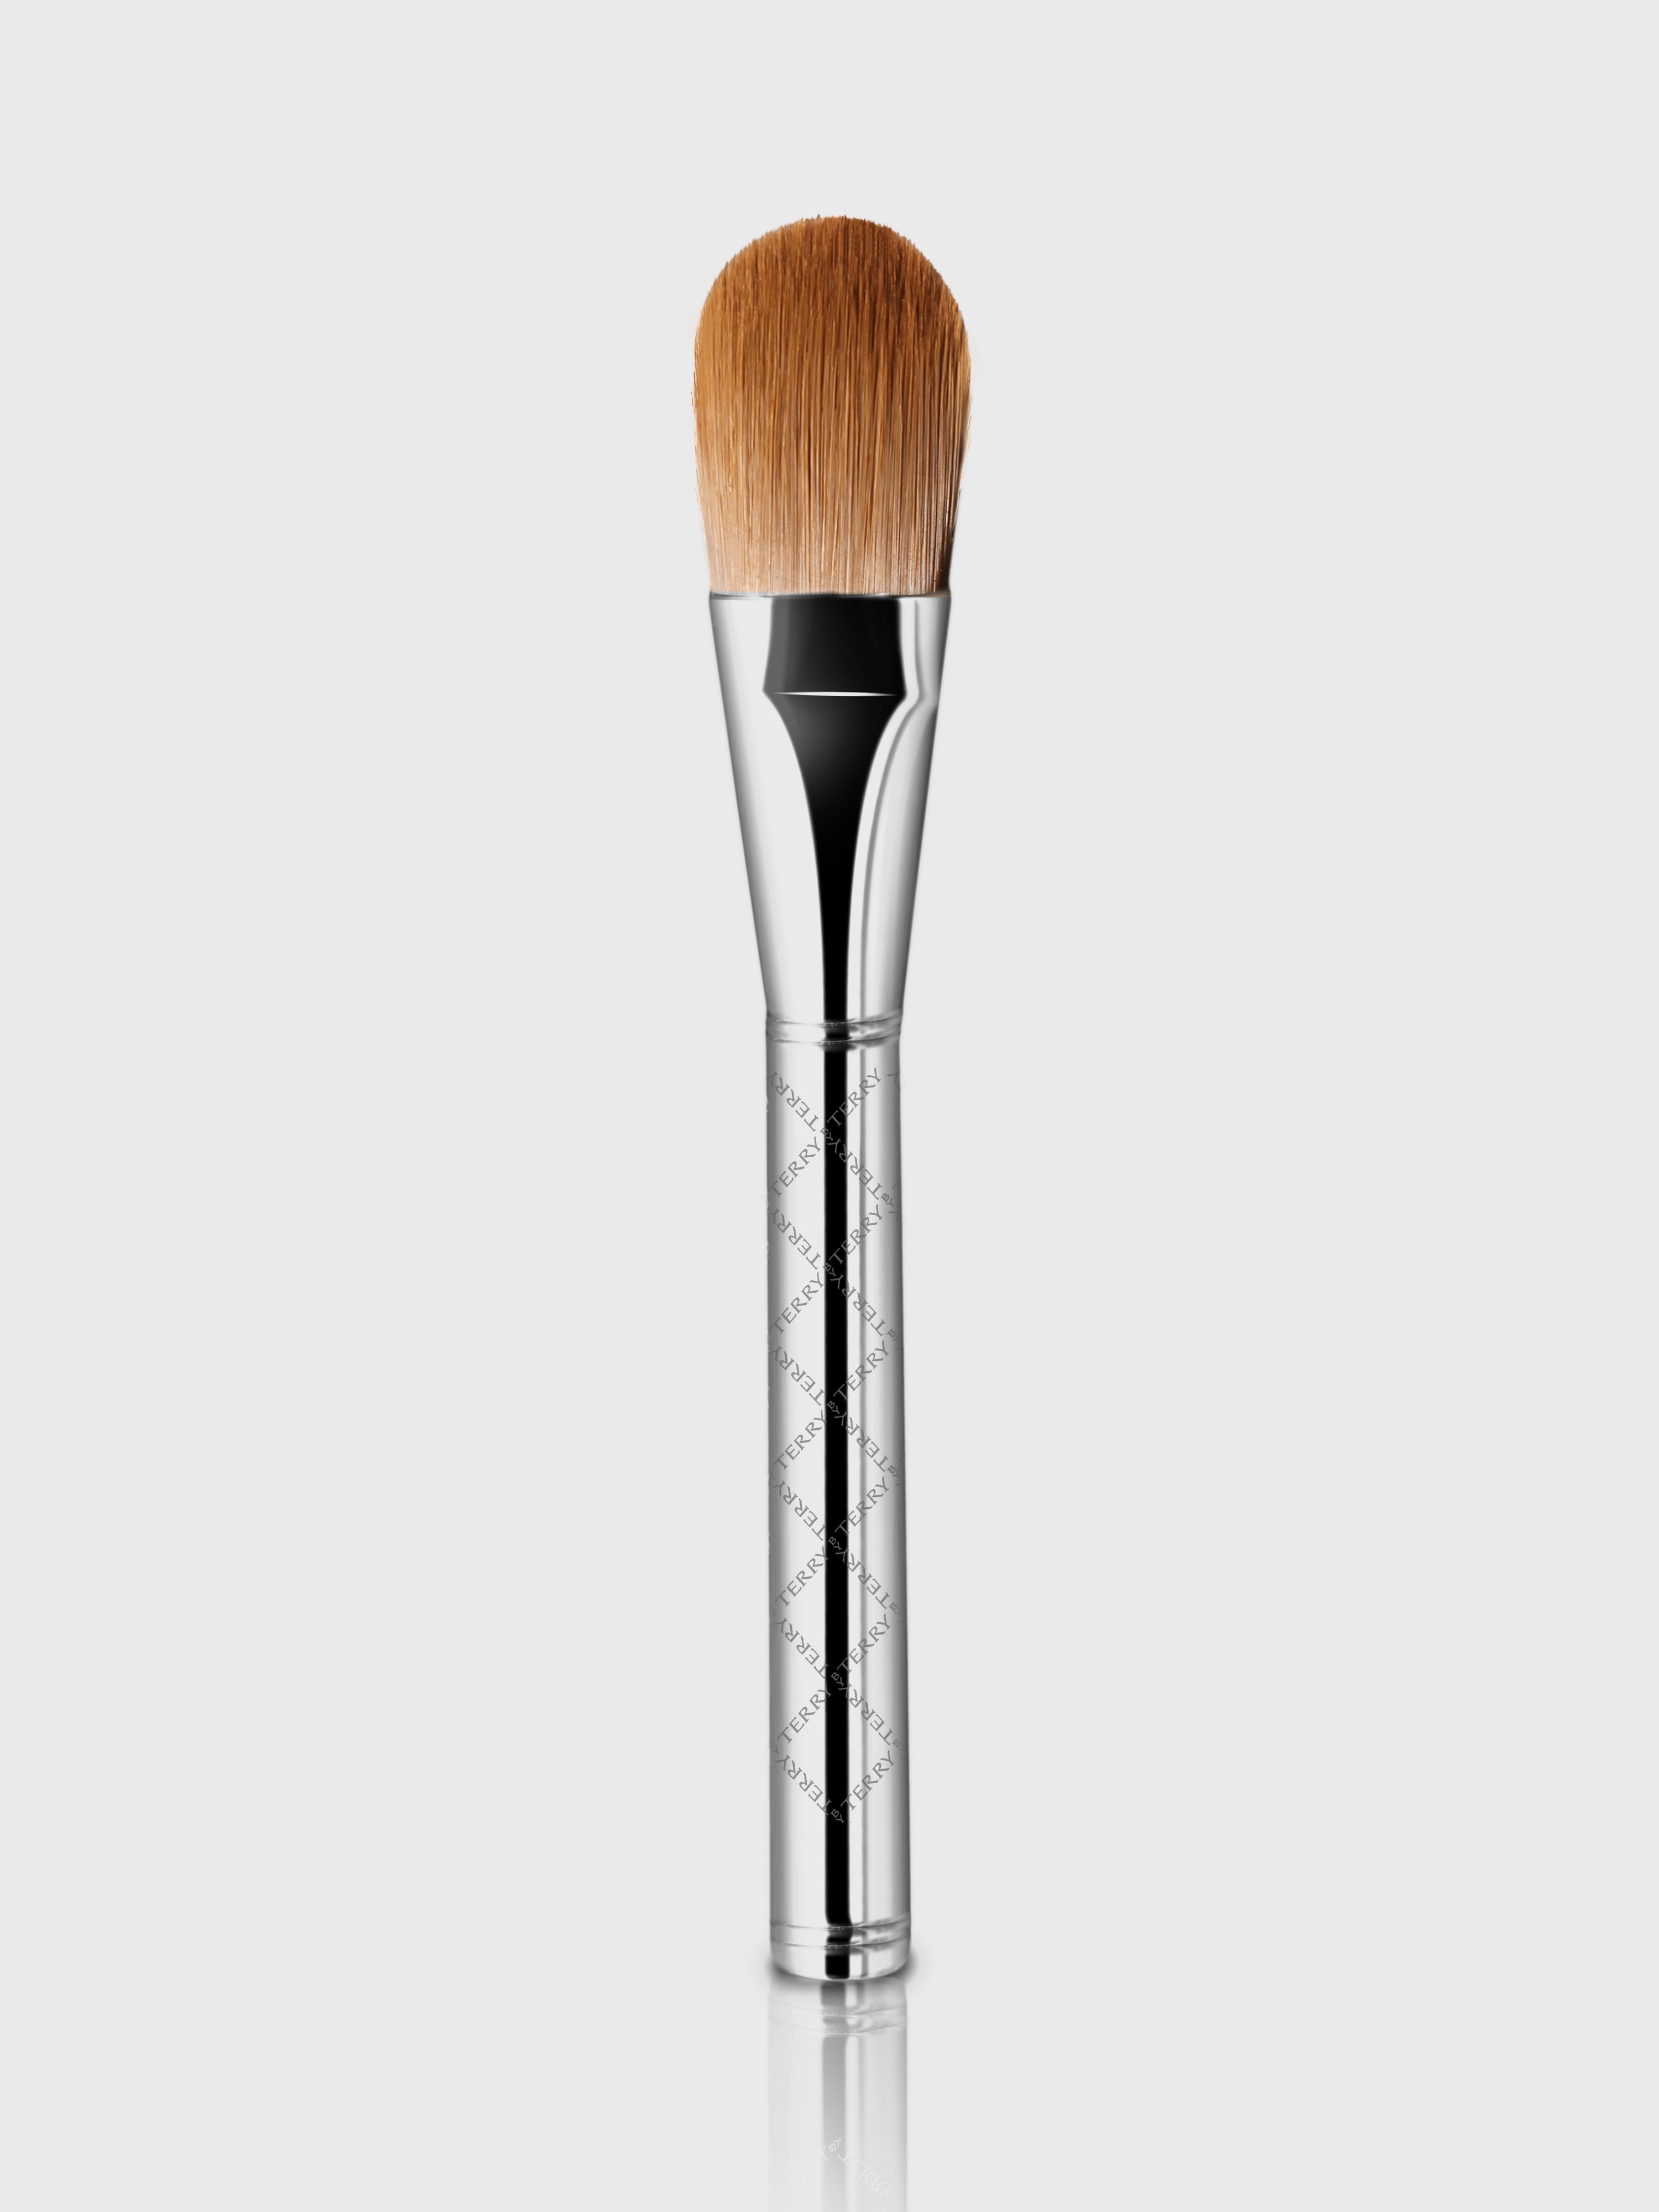 BY TERRY BY TERRY PRECISION 6 FOUNDATION BRUSH